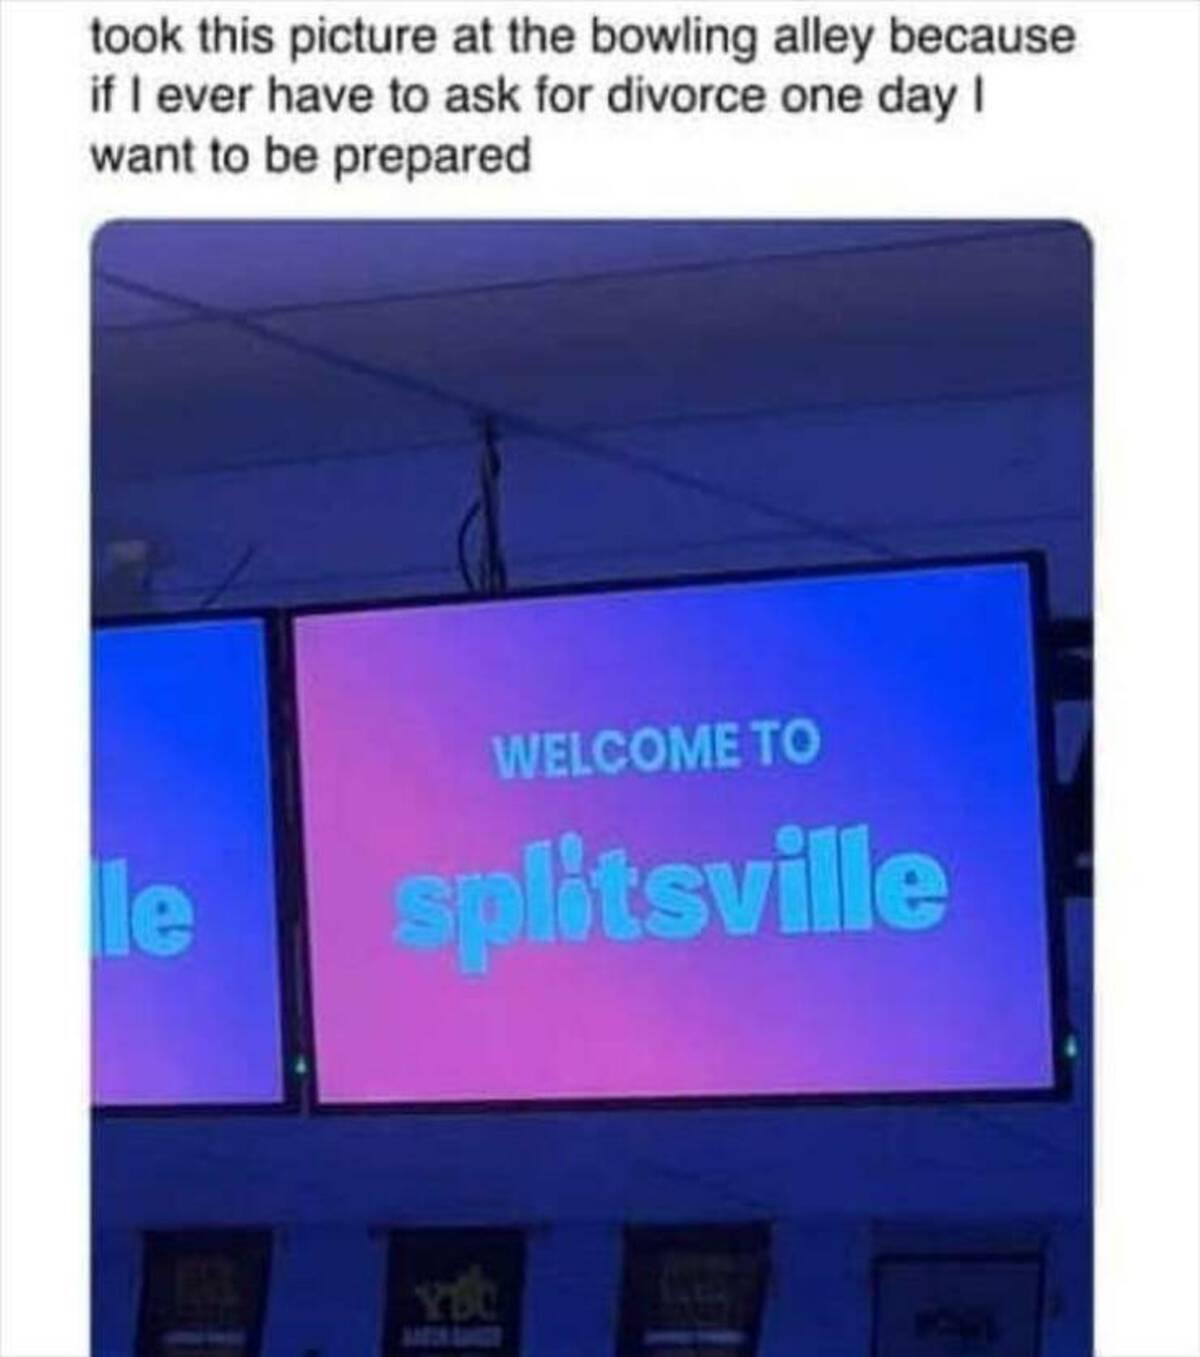 display advertising - took this picture at the bowling alley because if I ever have to ask for divorce one day I want to be prepared le Welcome To splitsville 1201